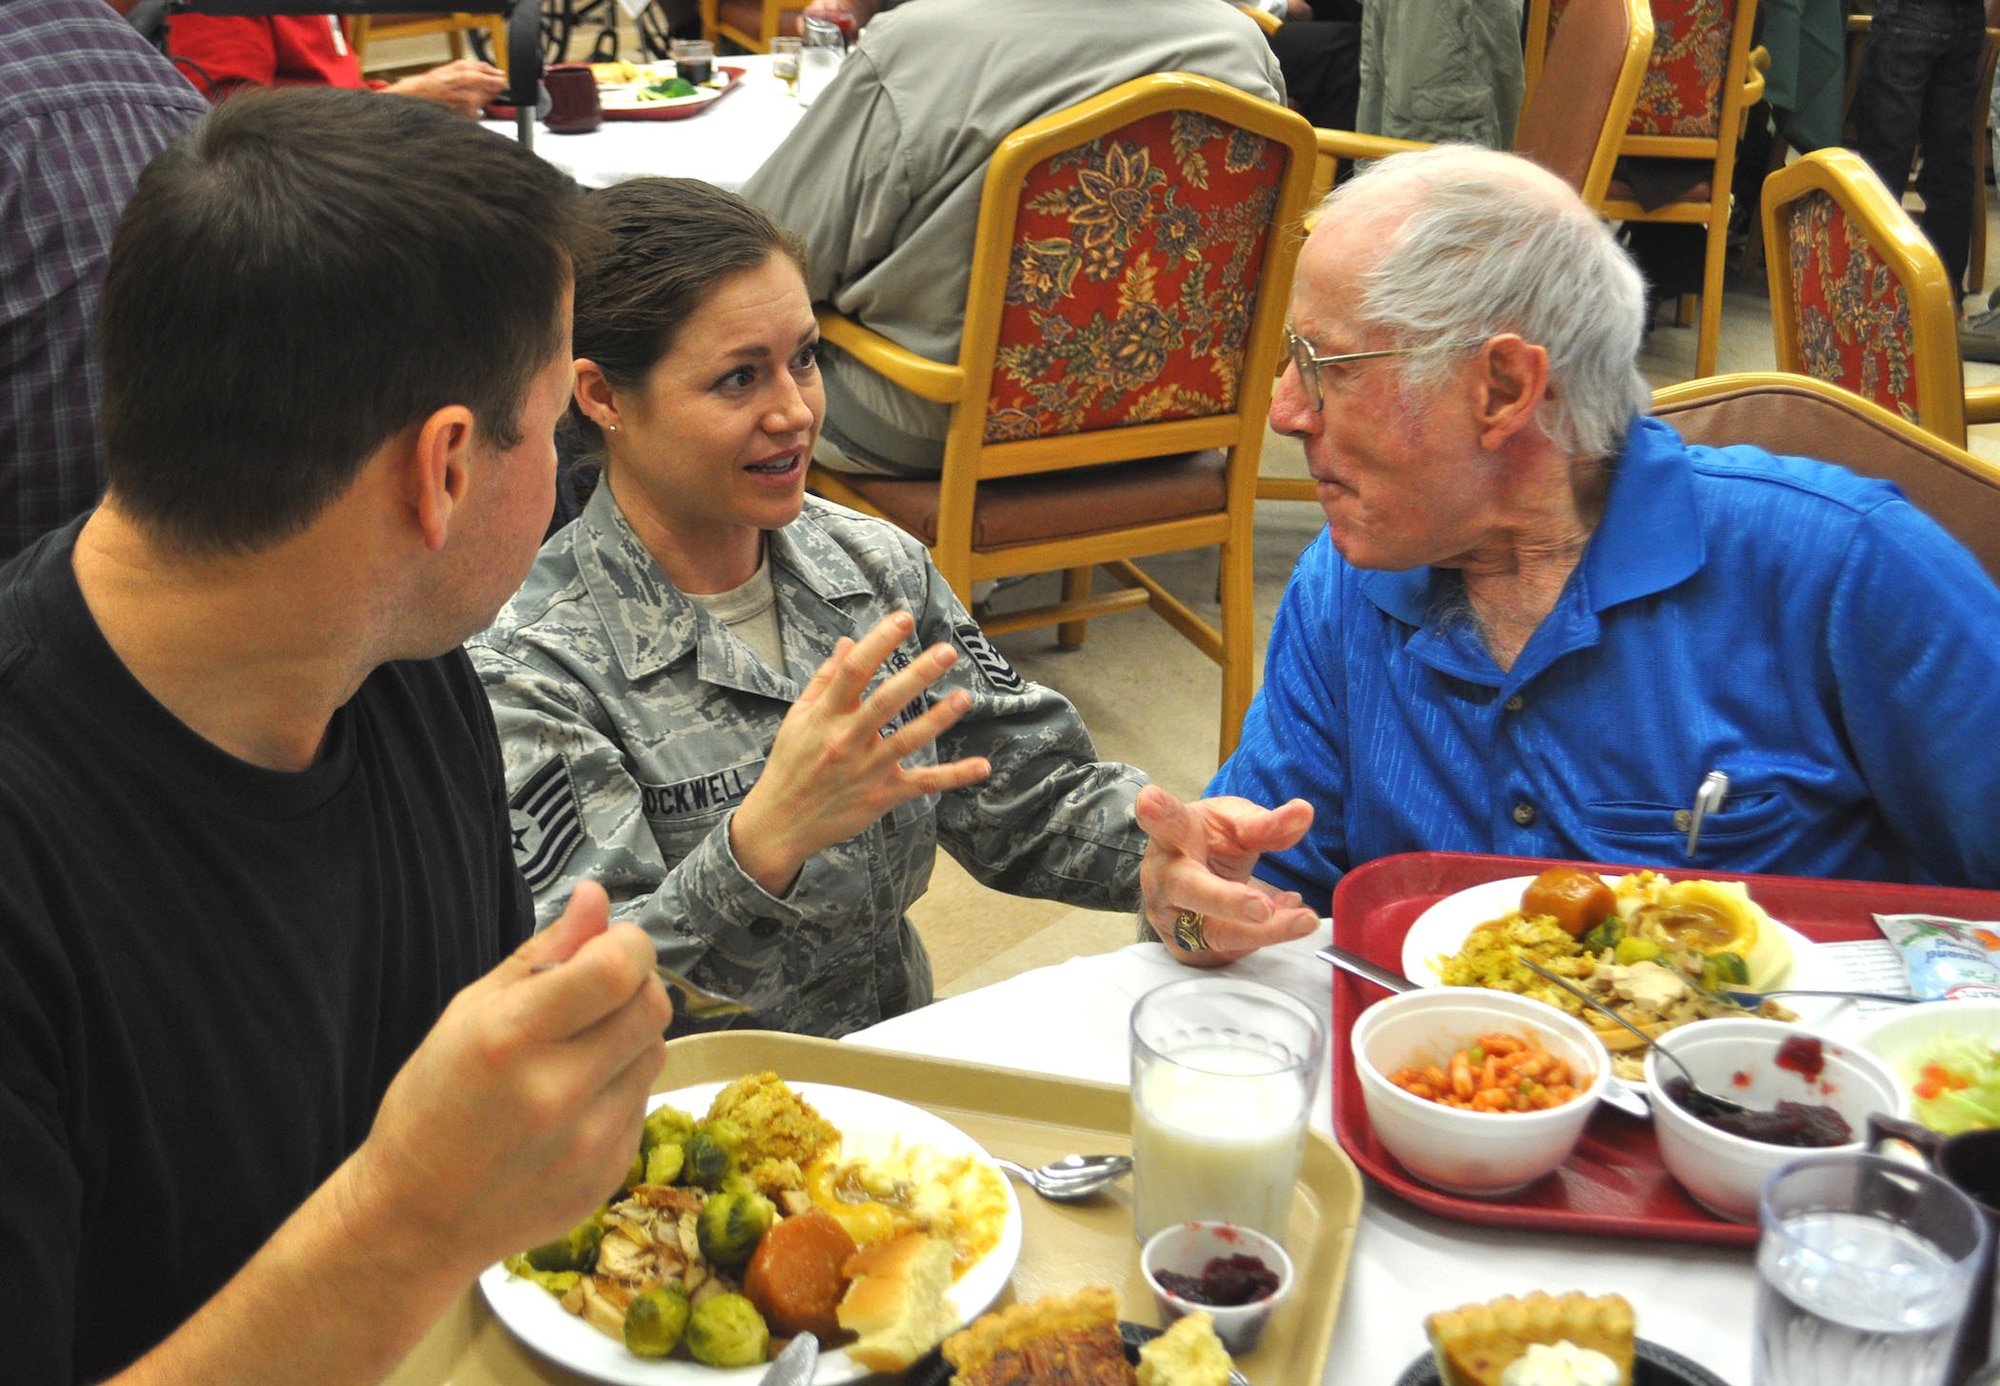 TRAVIS AIR FORCE BASE, Calif. -- Technical Sgt. Cameo Rockwell, 349th Civil Engineer Squadron, talks with a veteran at the California Veterans Home, Yountville,  on Thanksgiving Day. Rockwell joined a group of active and Reserve volunteers from Travis AFB, who spent some of their holiday serving the meal, and visiting with the veterans and their families. (U.S. Air Force photo/SMSgt. (ret) Ellen Hatfield)
